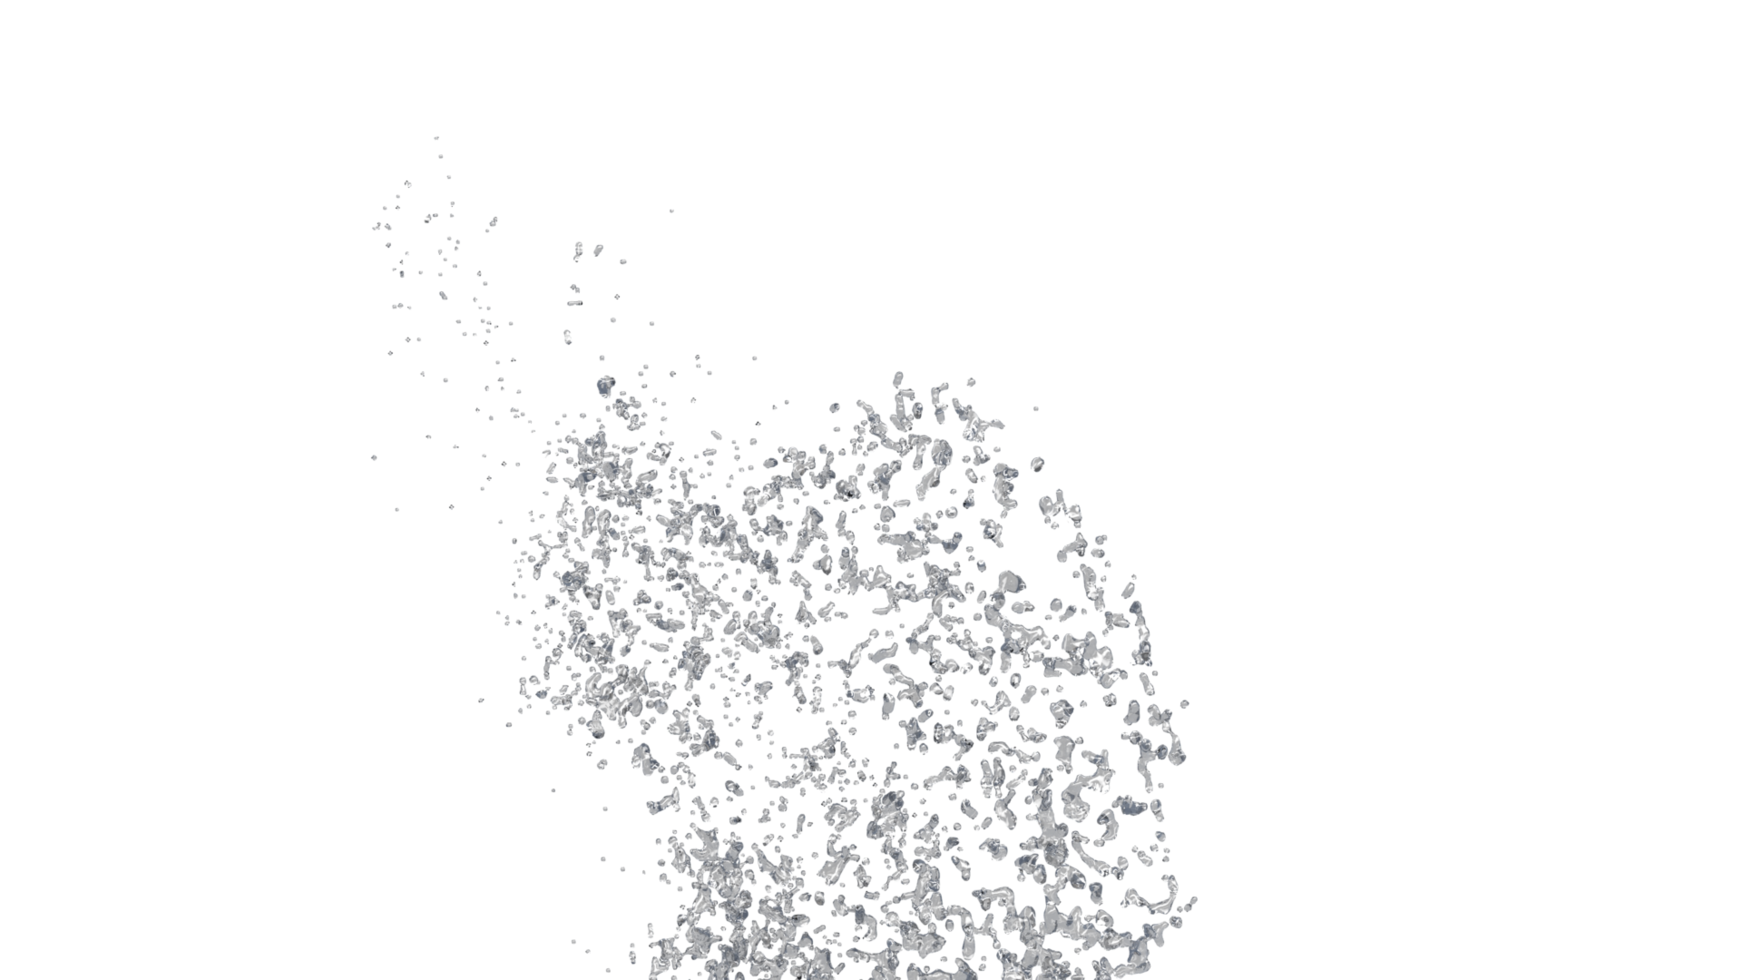 Water Splash with Droplets png